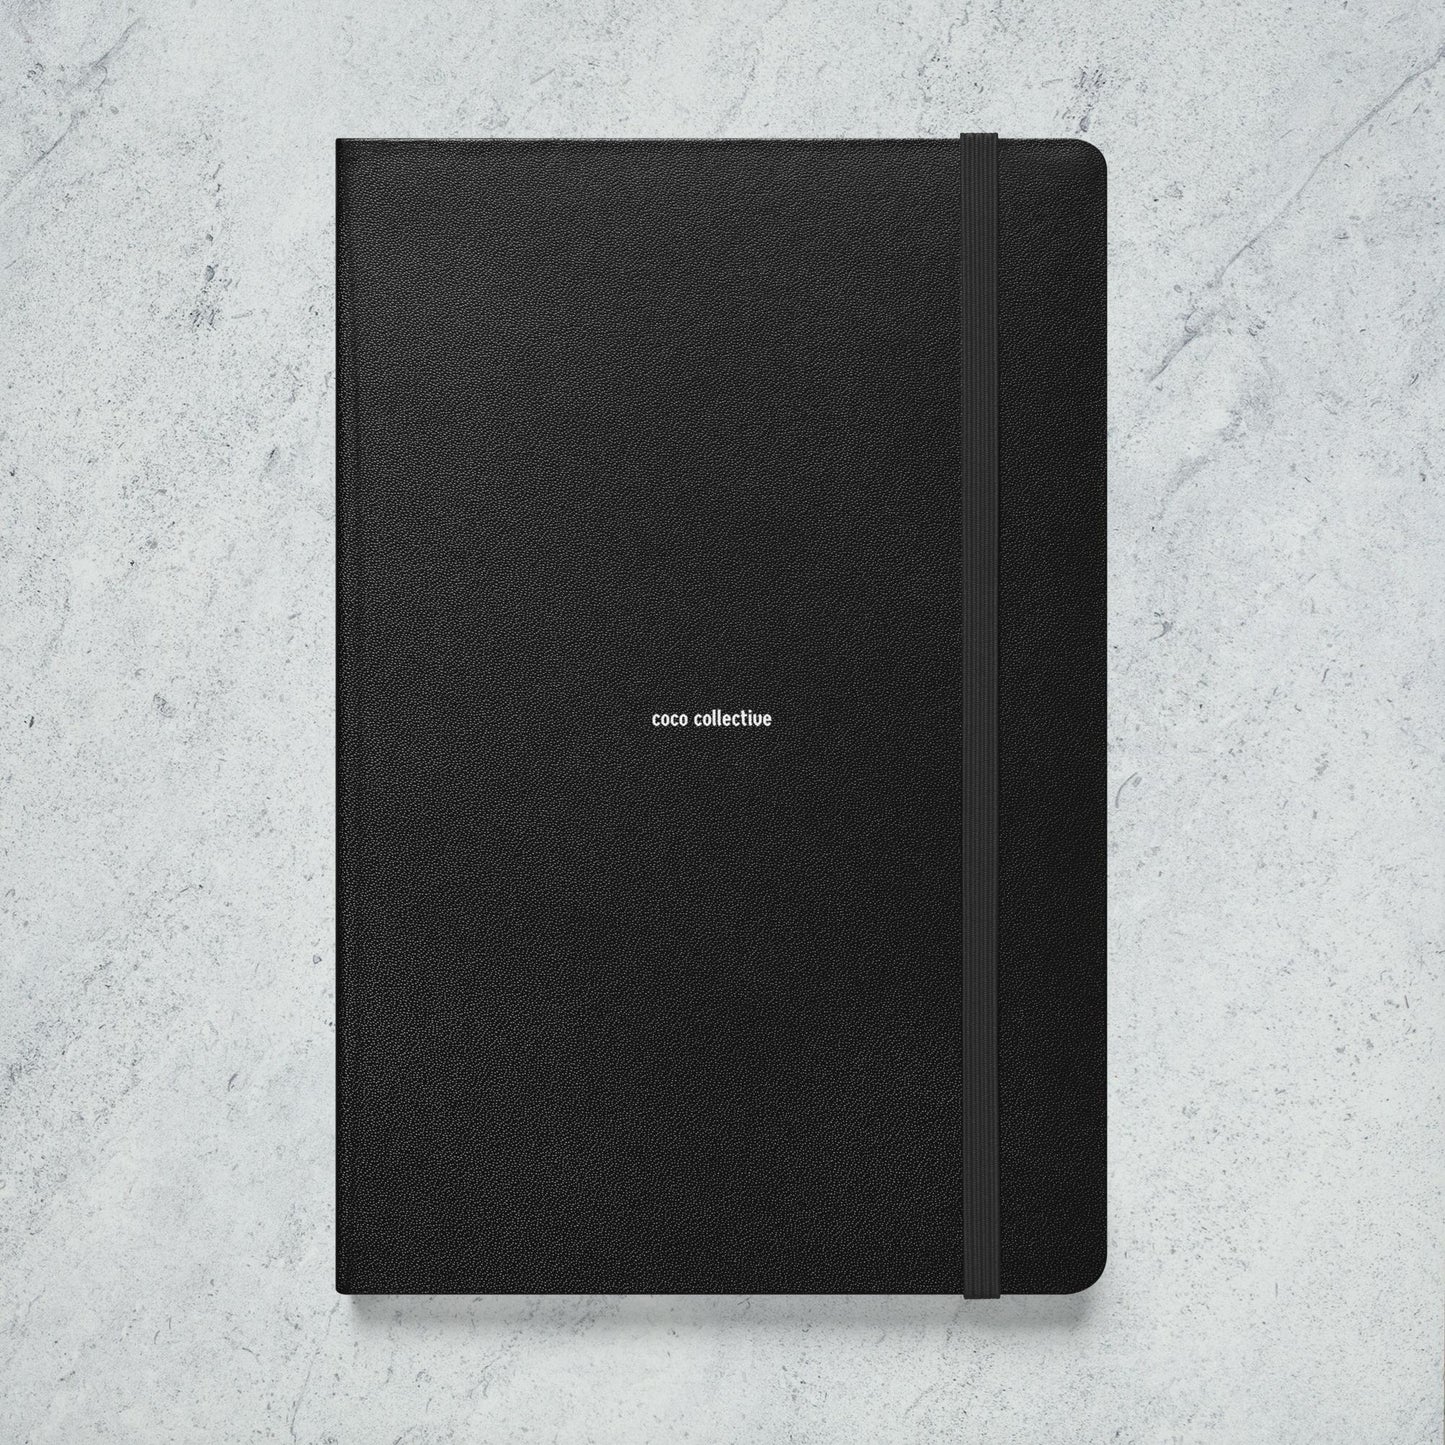 coco collective hardcover bound notebook